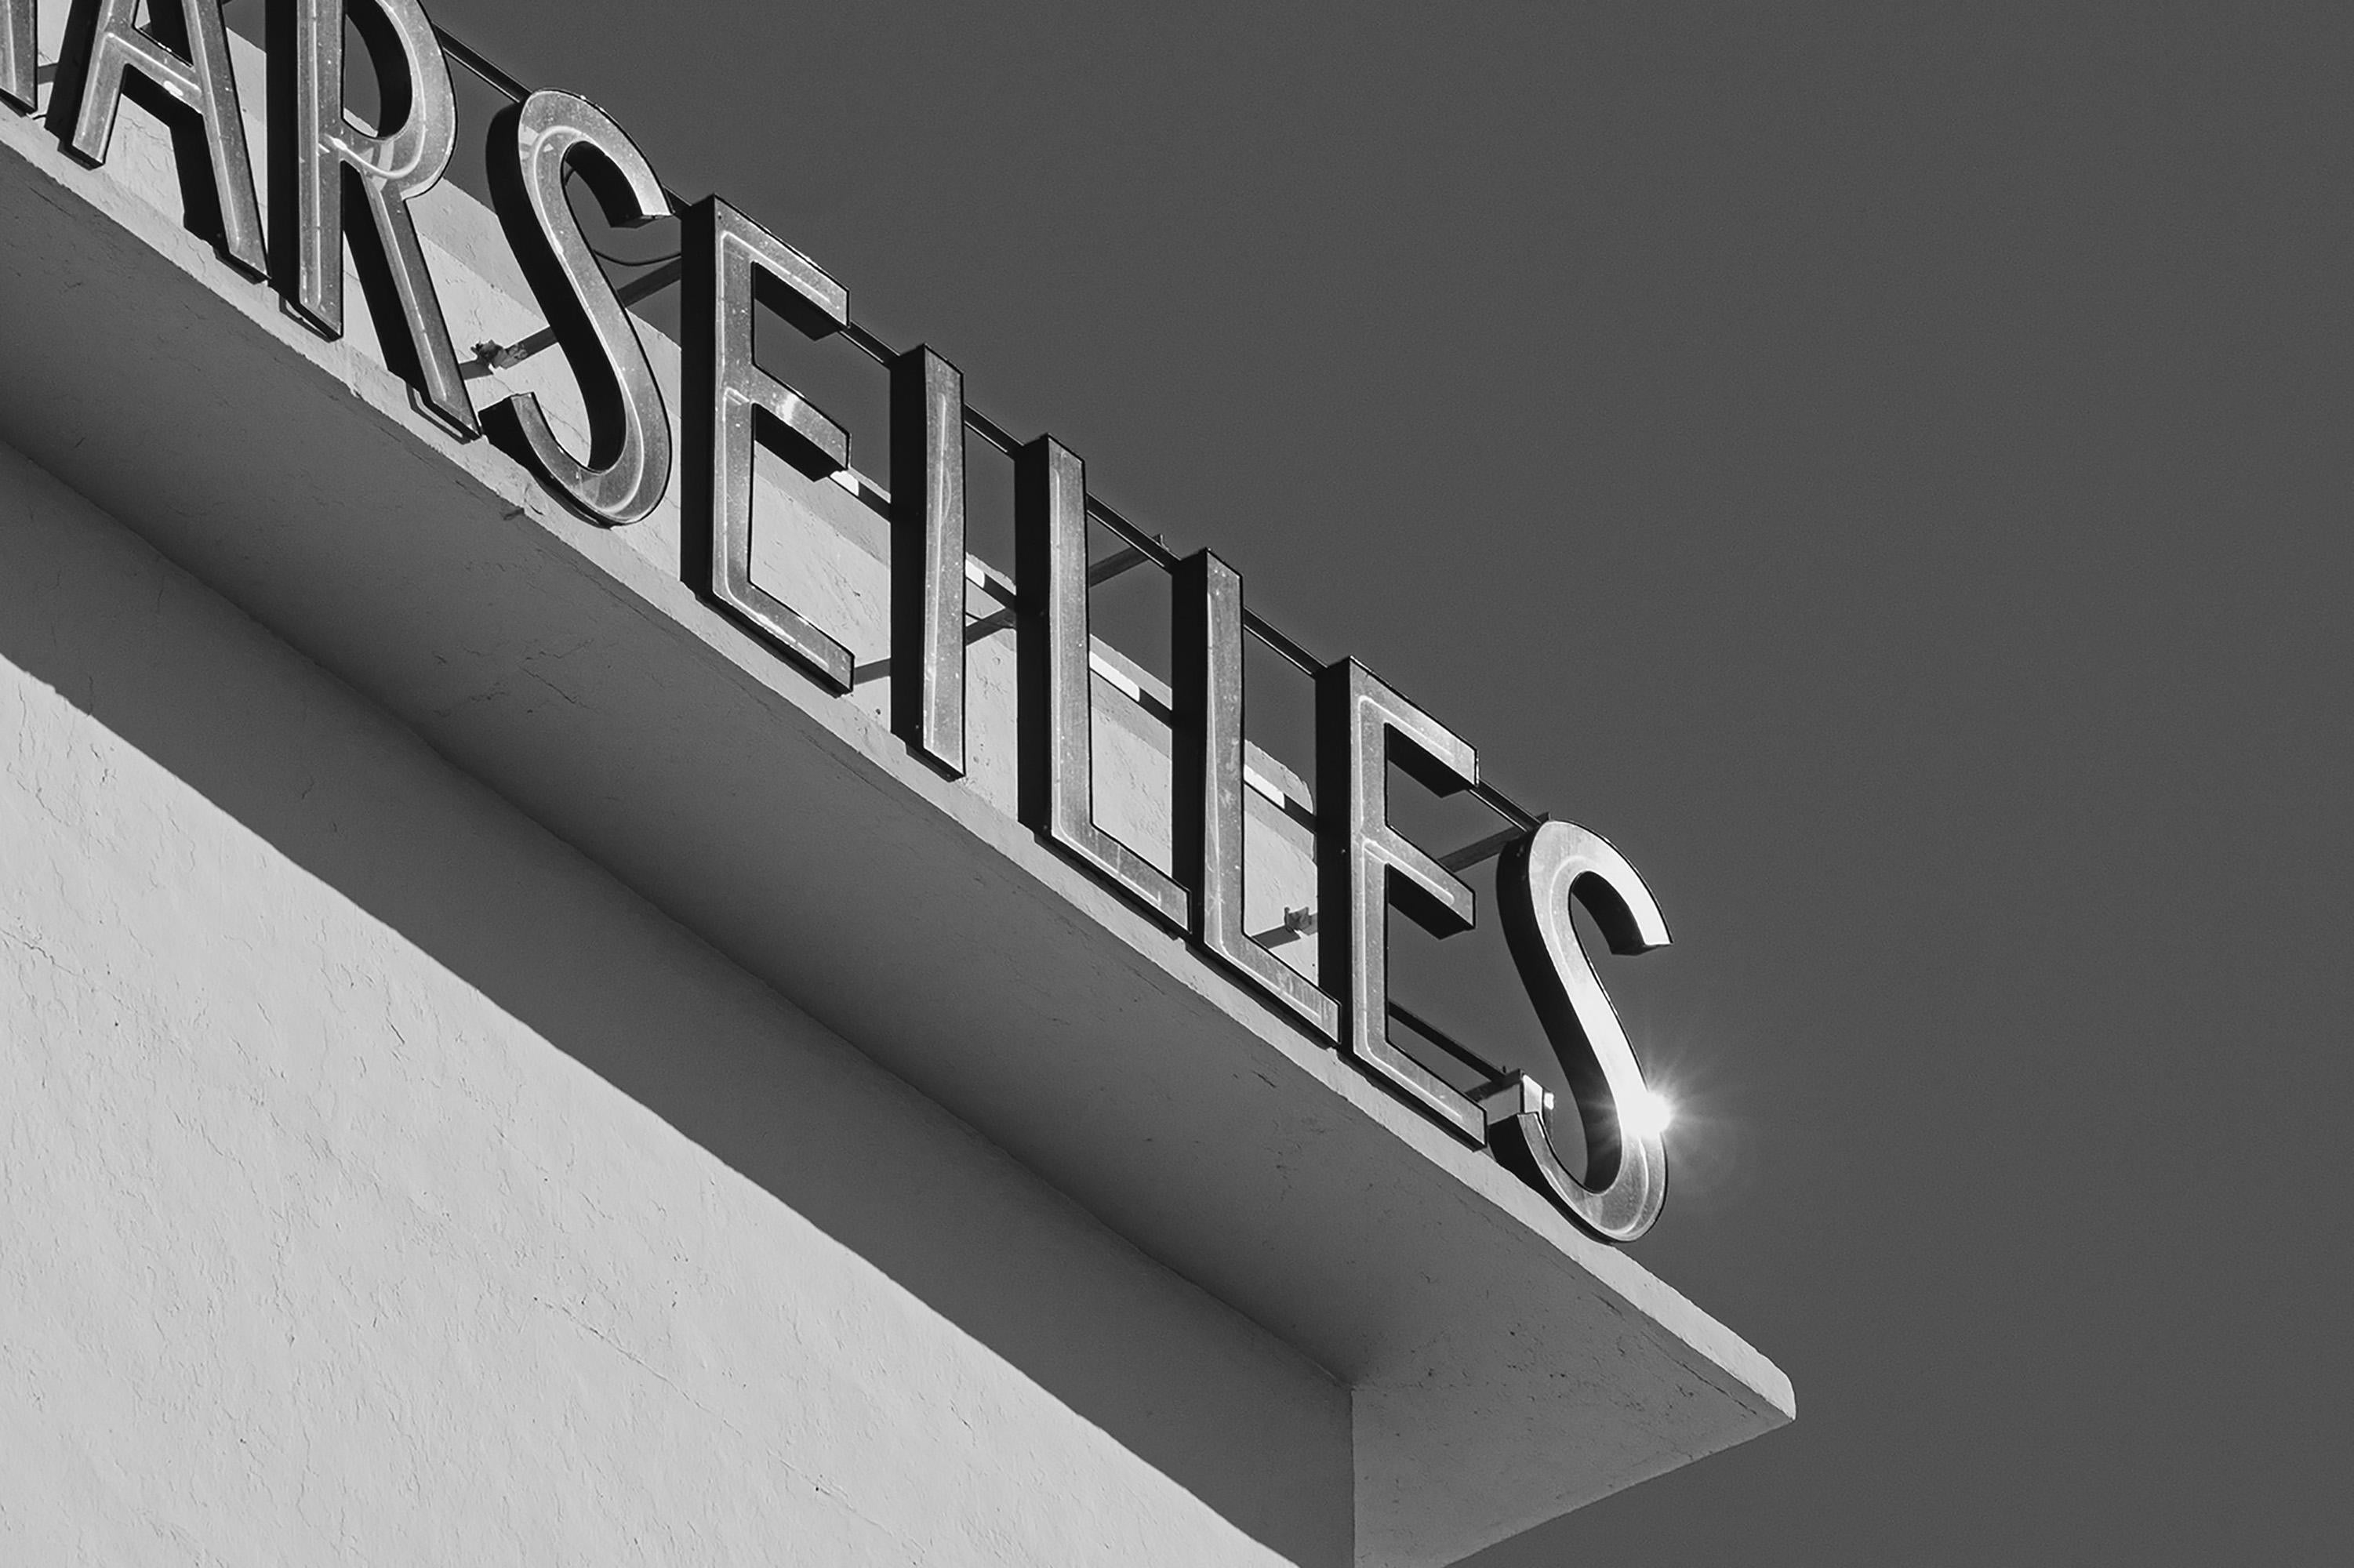 The Marseilles, Miami Art Deco Hotel, Tropical. Architecture, French Typo, B&W - Black Black and White Photograph by Kind of Cyan